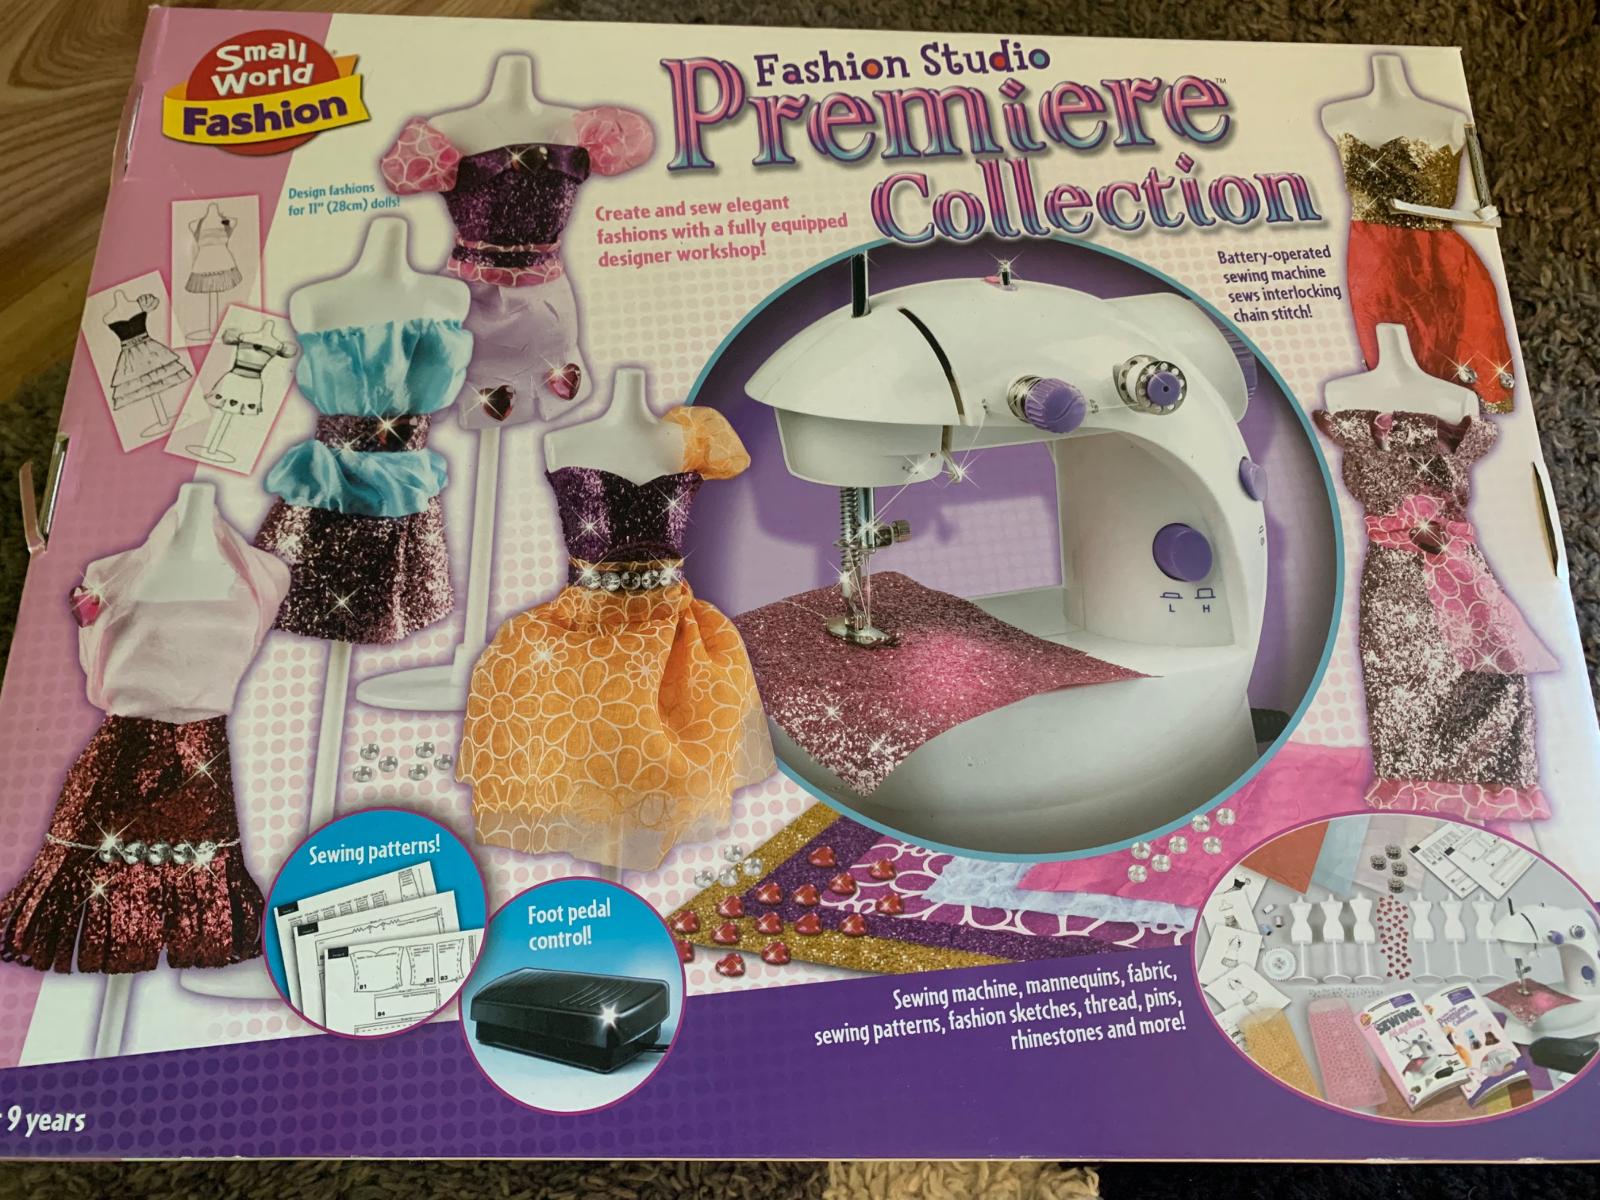 Fashion Studio Premier Collection Sewing Kit with Machine